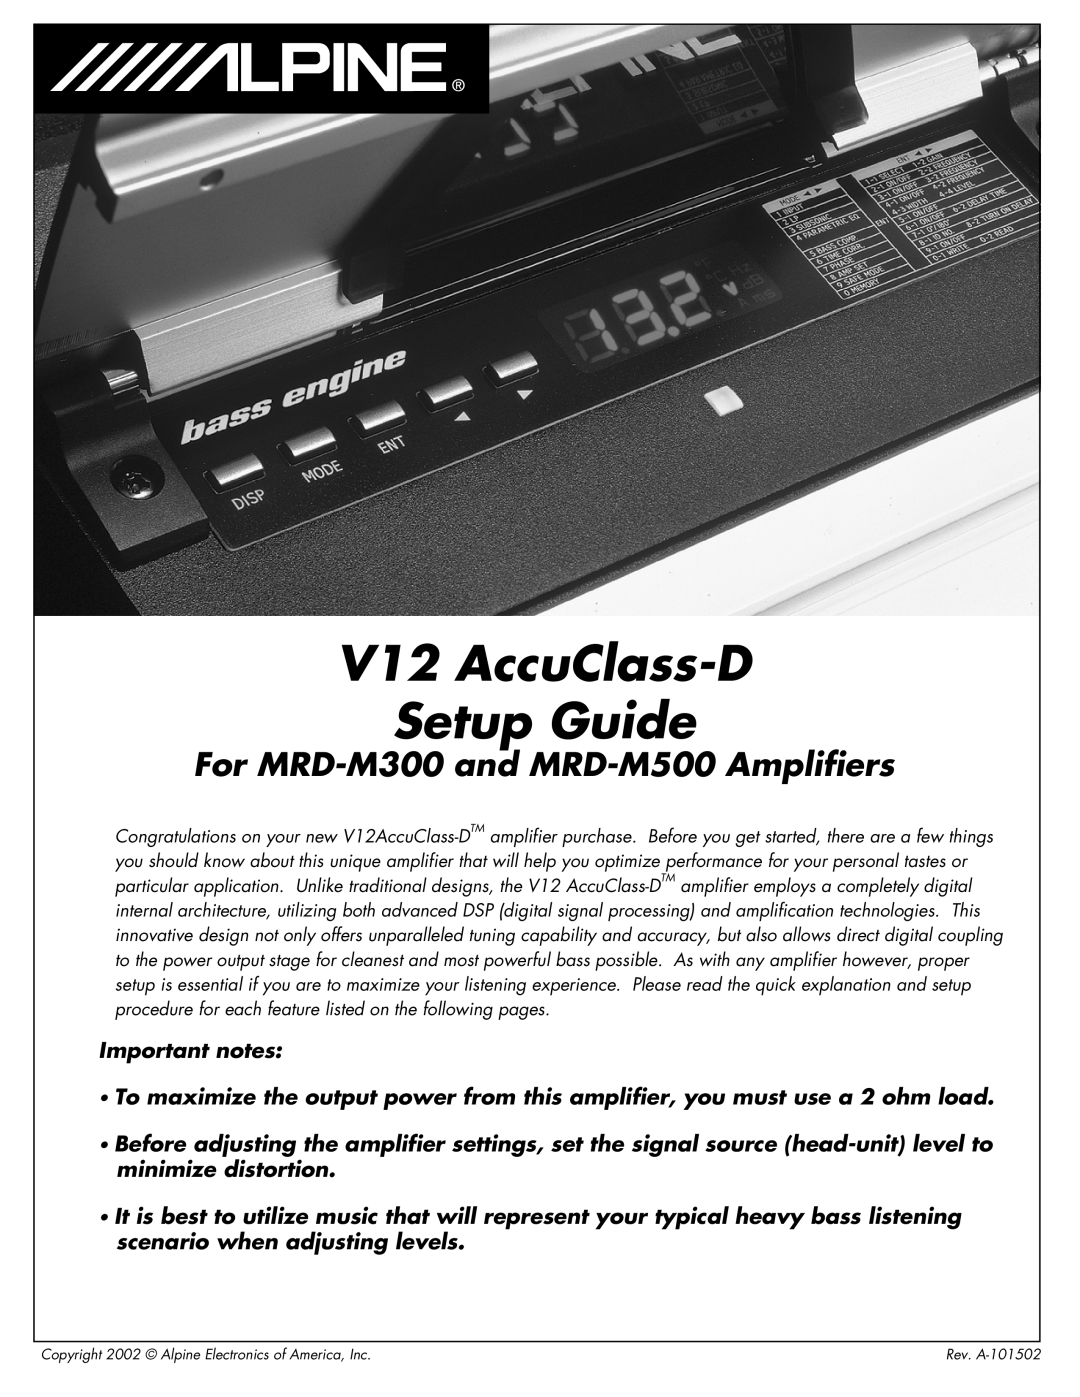 Alpine owner manual V12 AccuClass-D Setup Guide, For MRD-M300and MRD-M500Amplifiers 